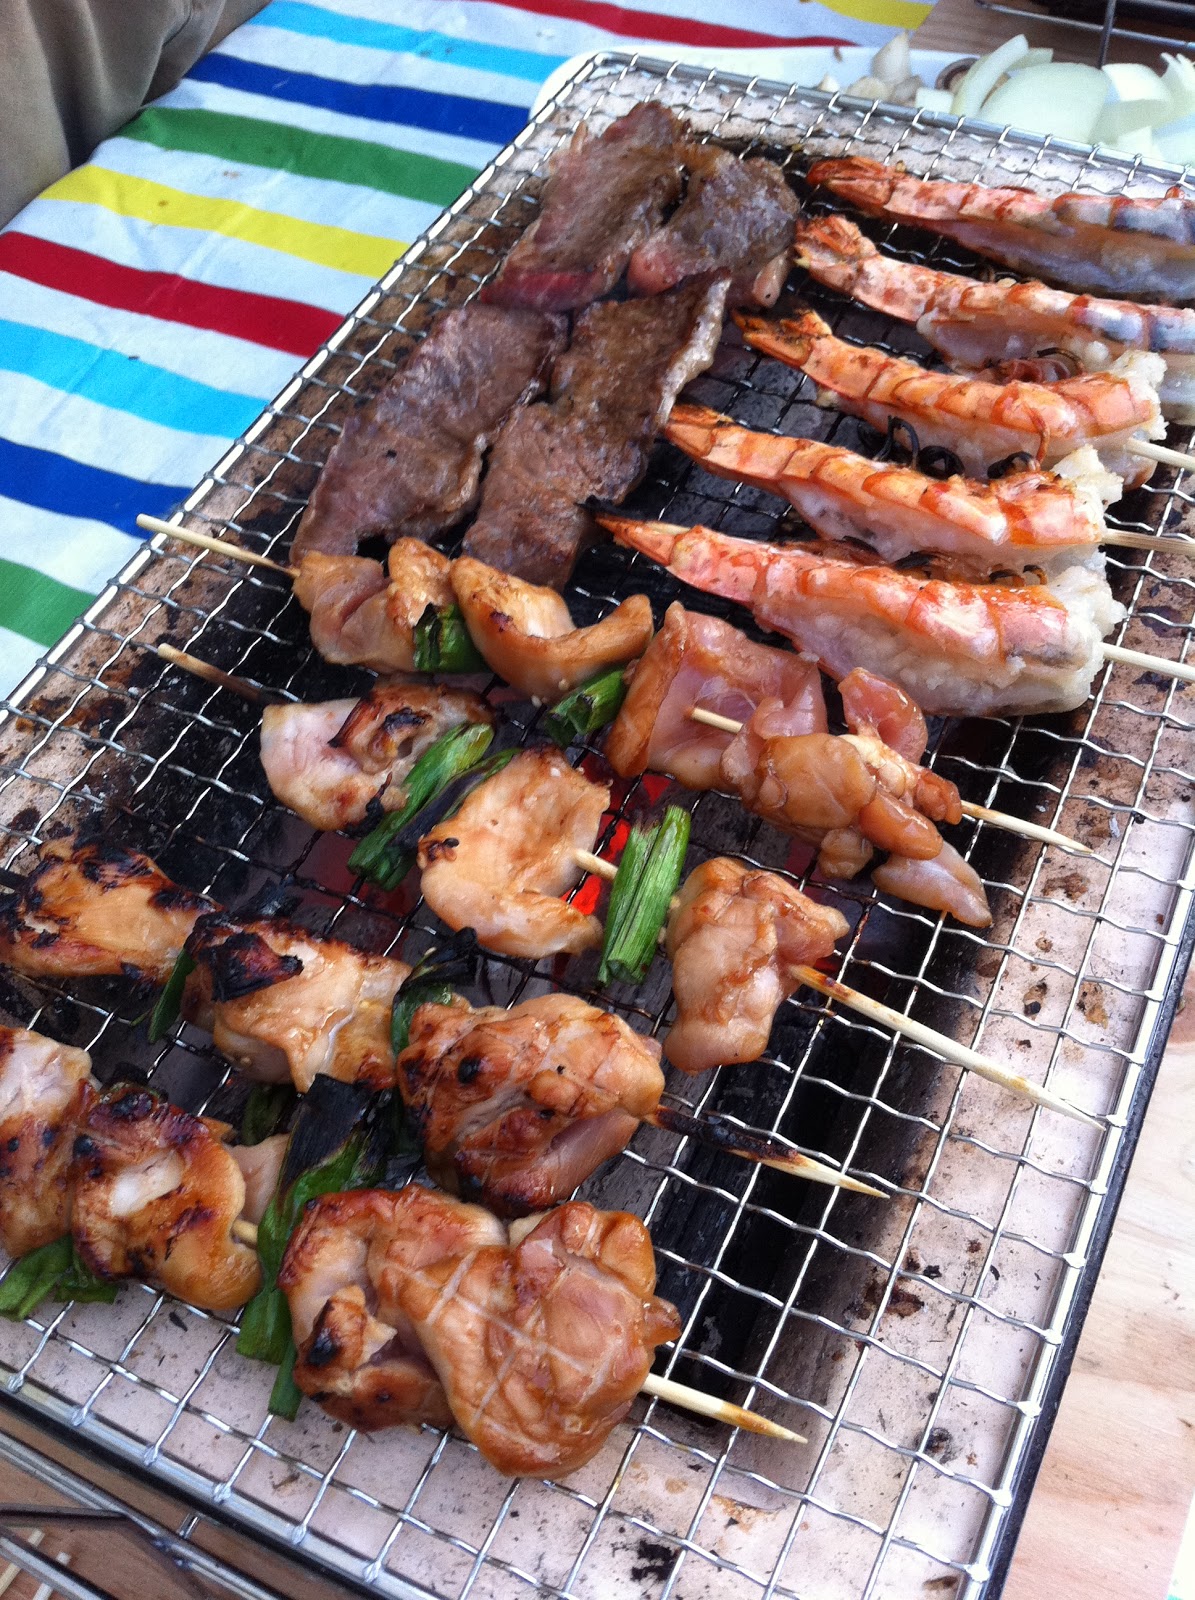 Deliciously Chic: Yakaniku - Our first attempt at Japanese BBQ!